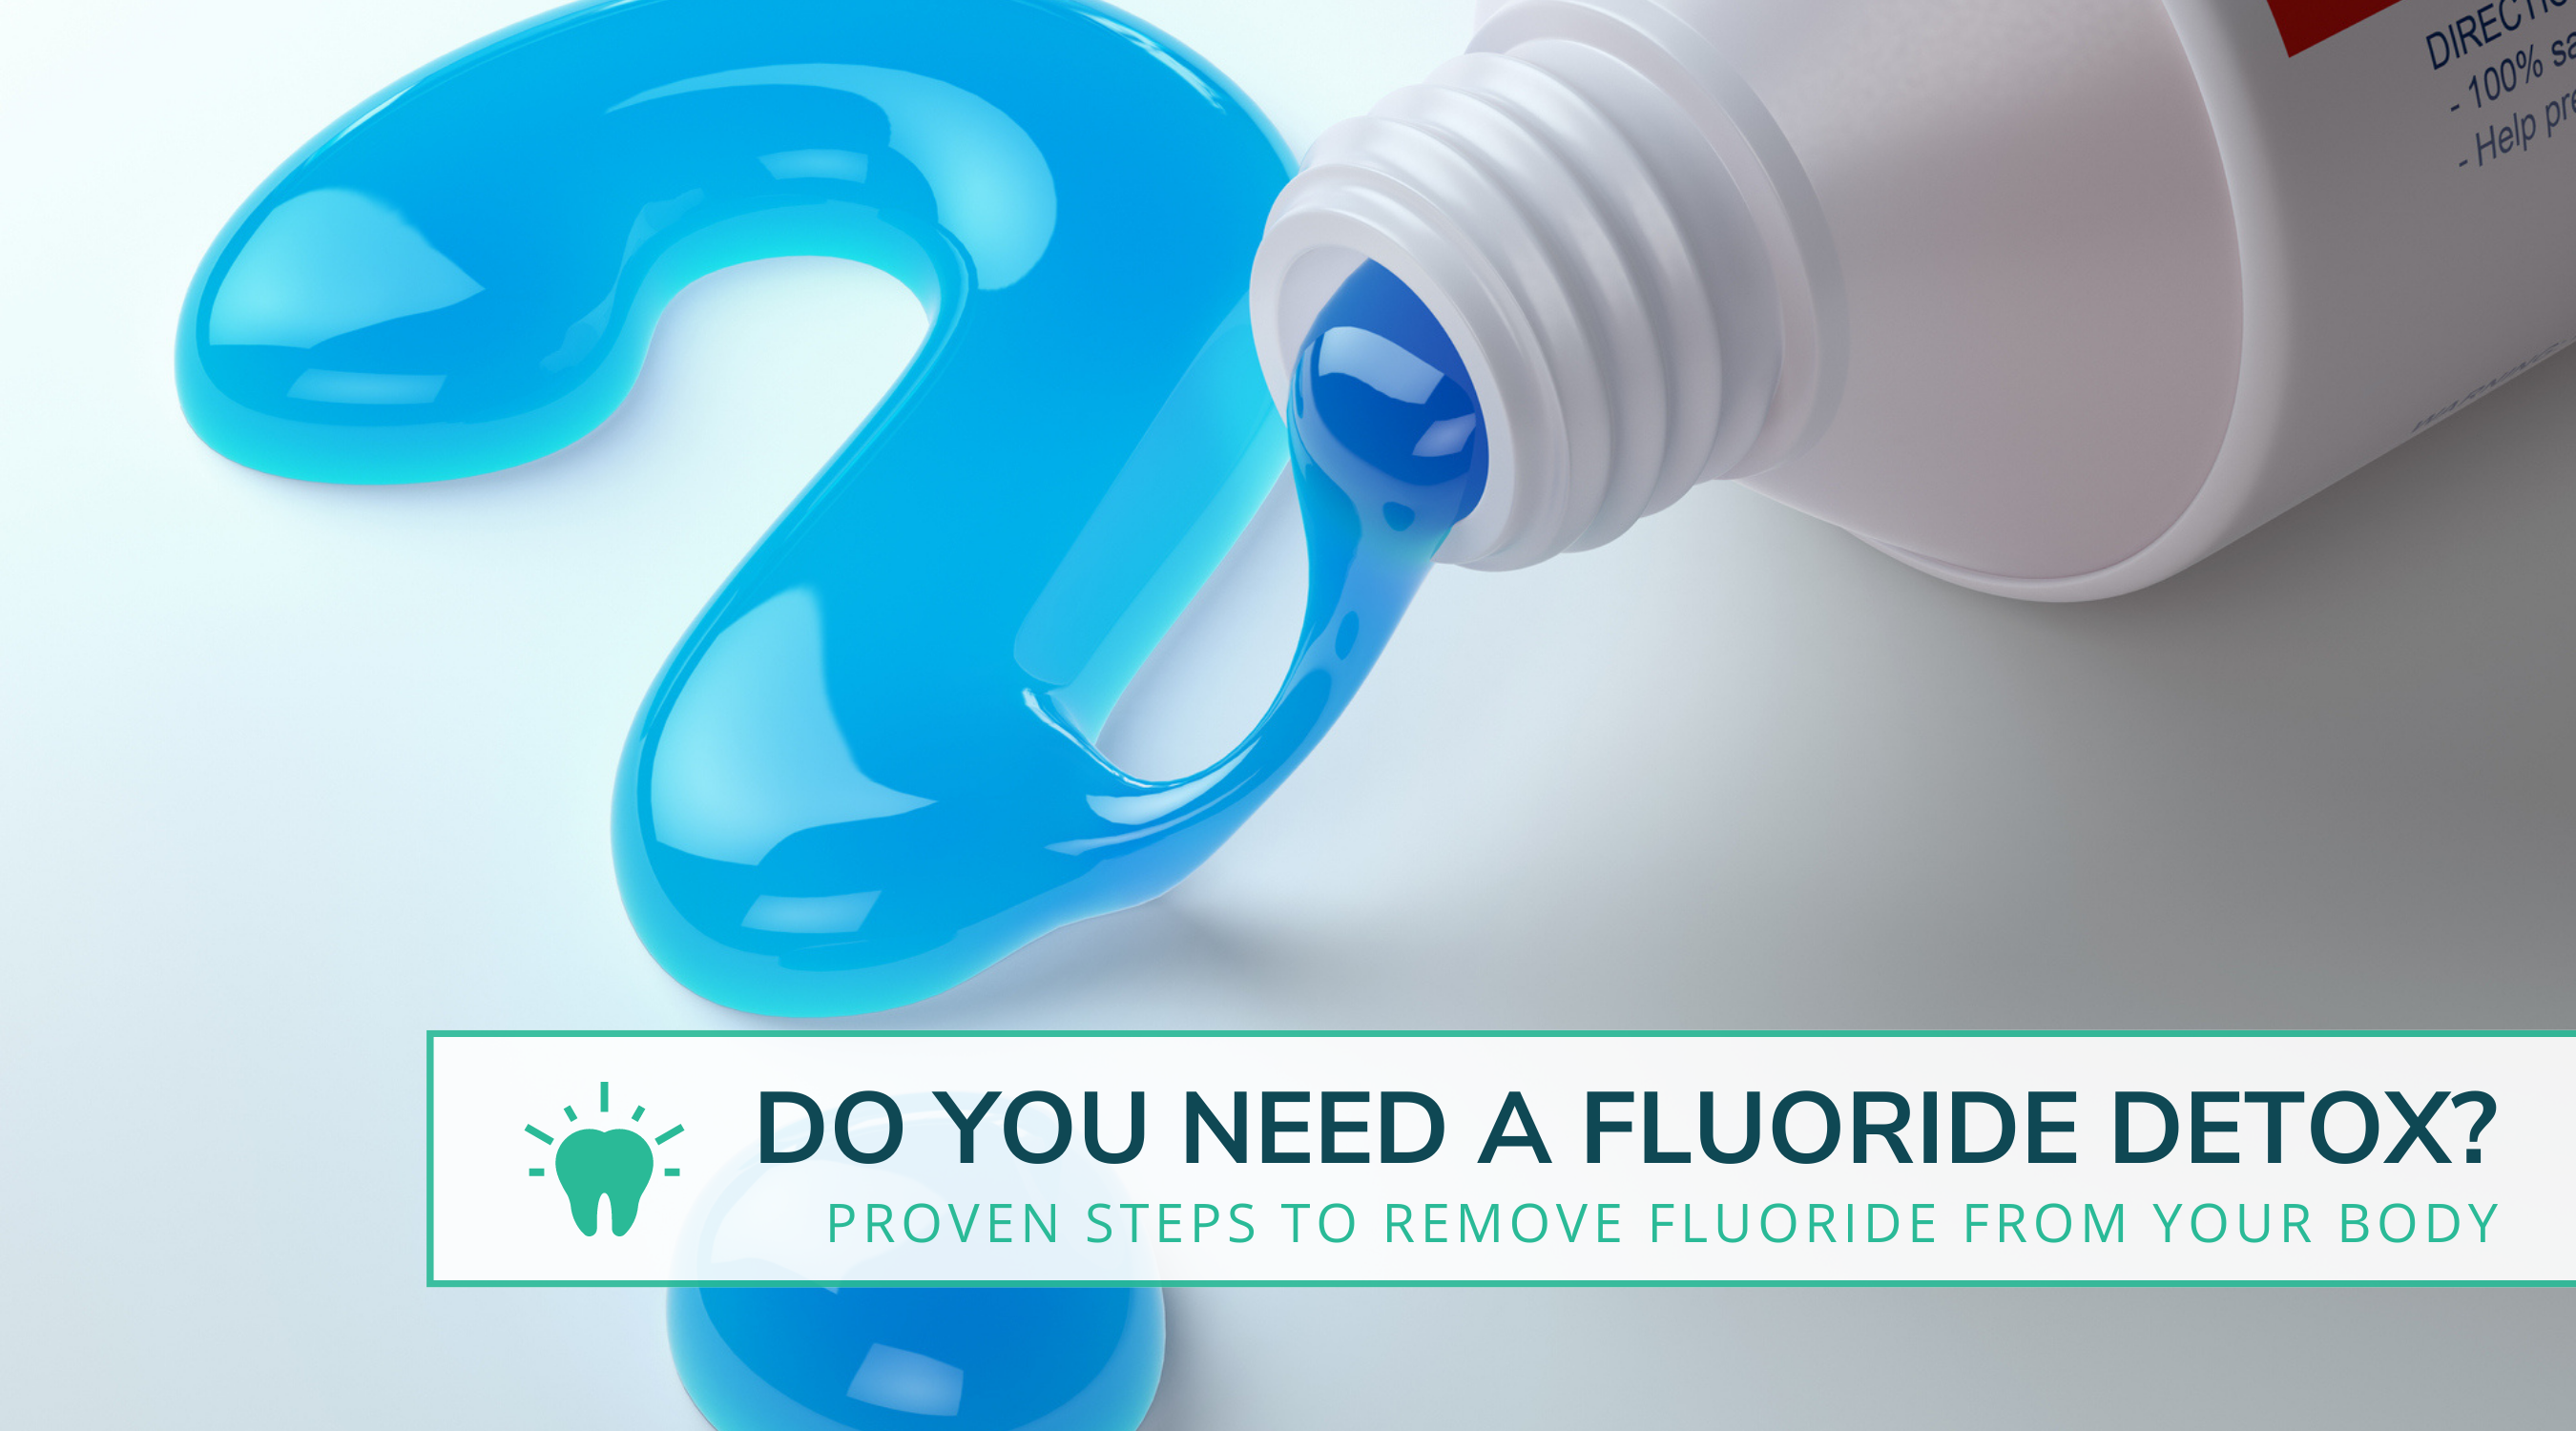 Do you need a fluoride detox? how to detox fluoride from your body.  